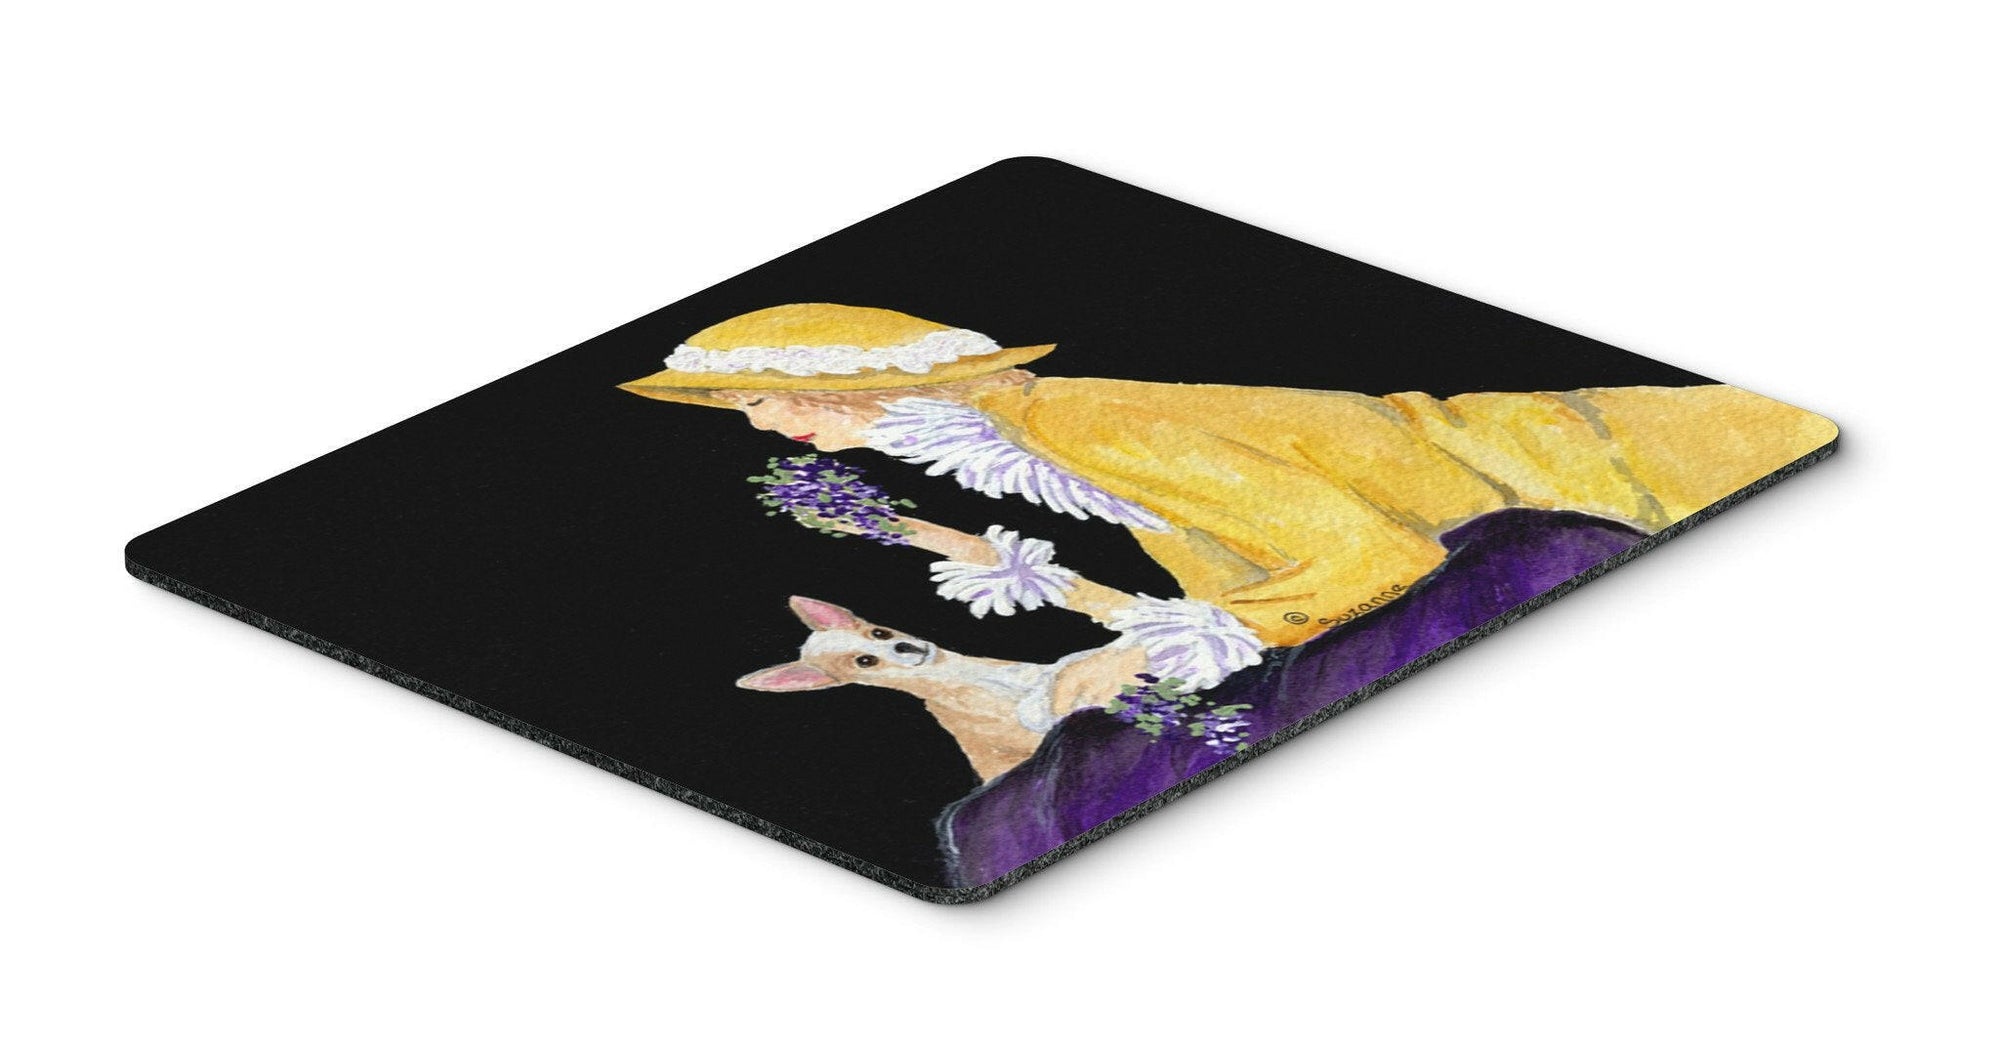 Chihuahua Mouse pad, hot pad, or trivet by Caroline's Treasures